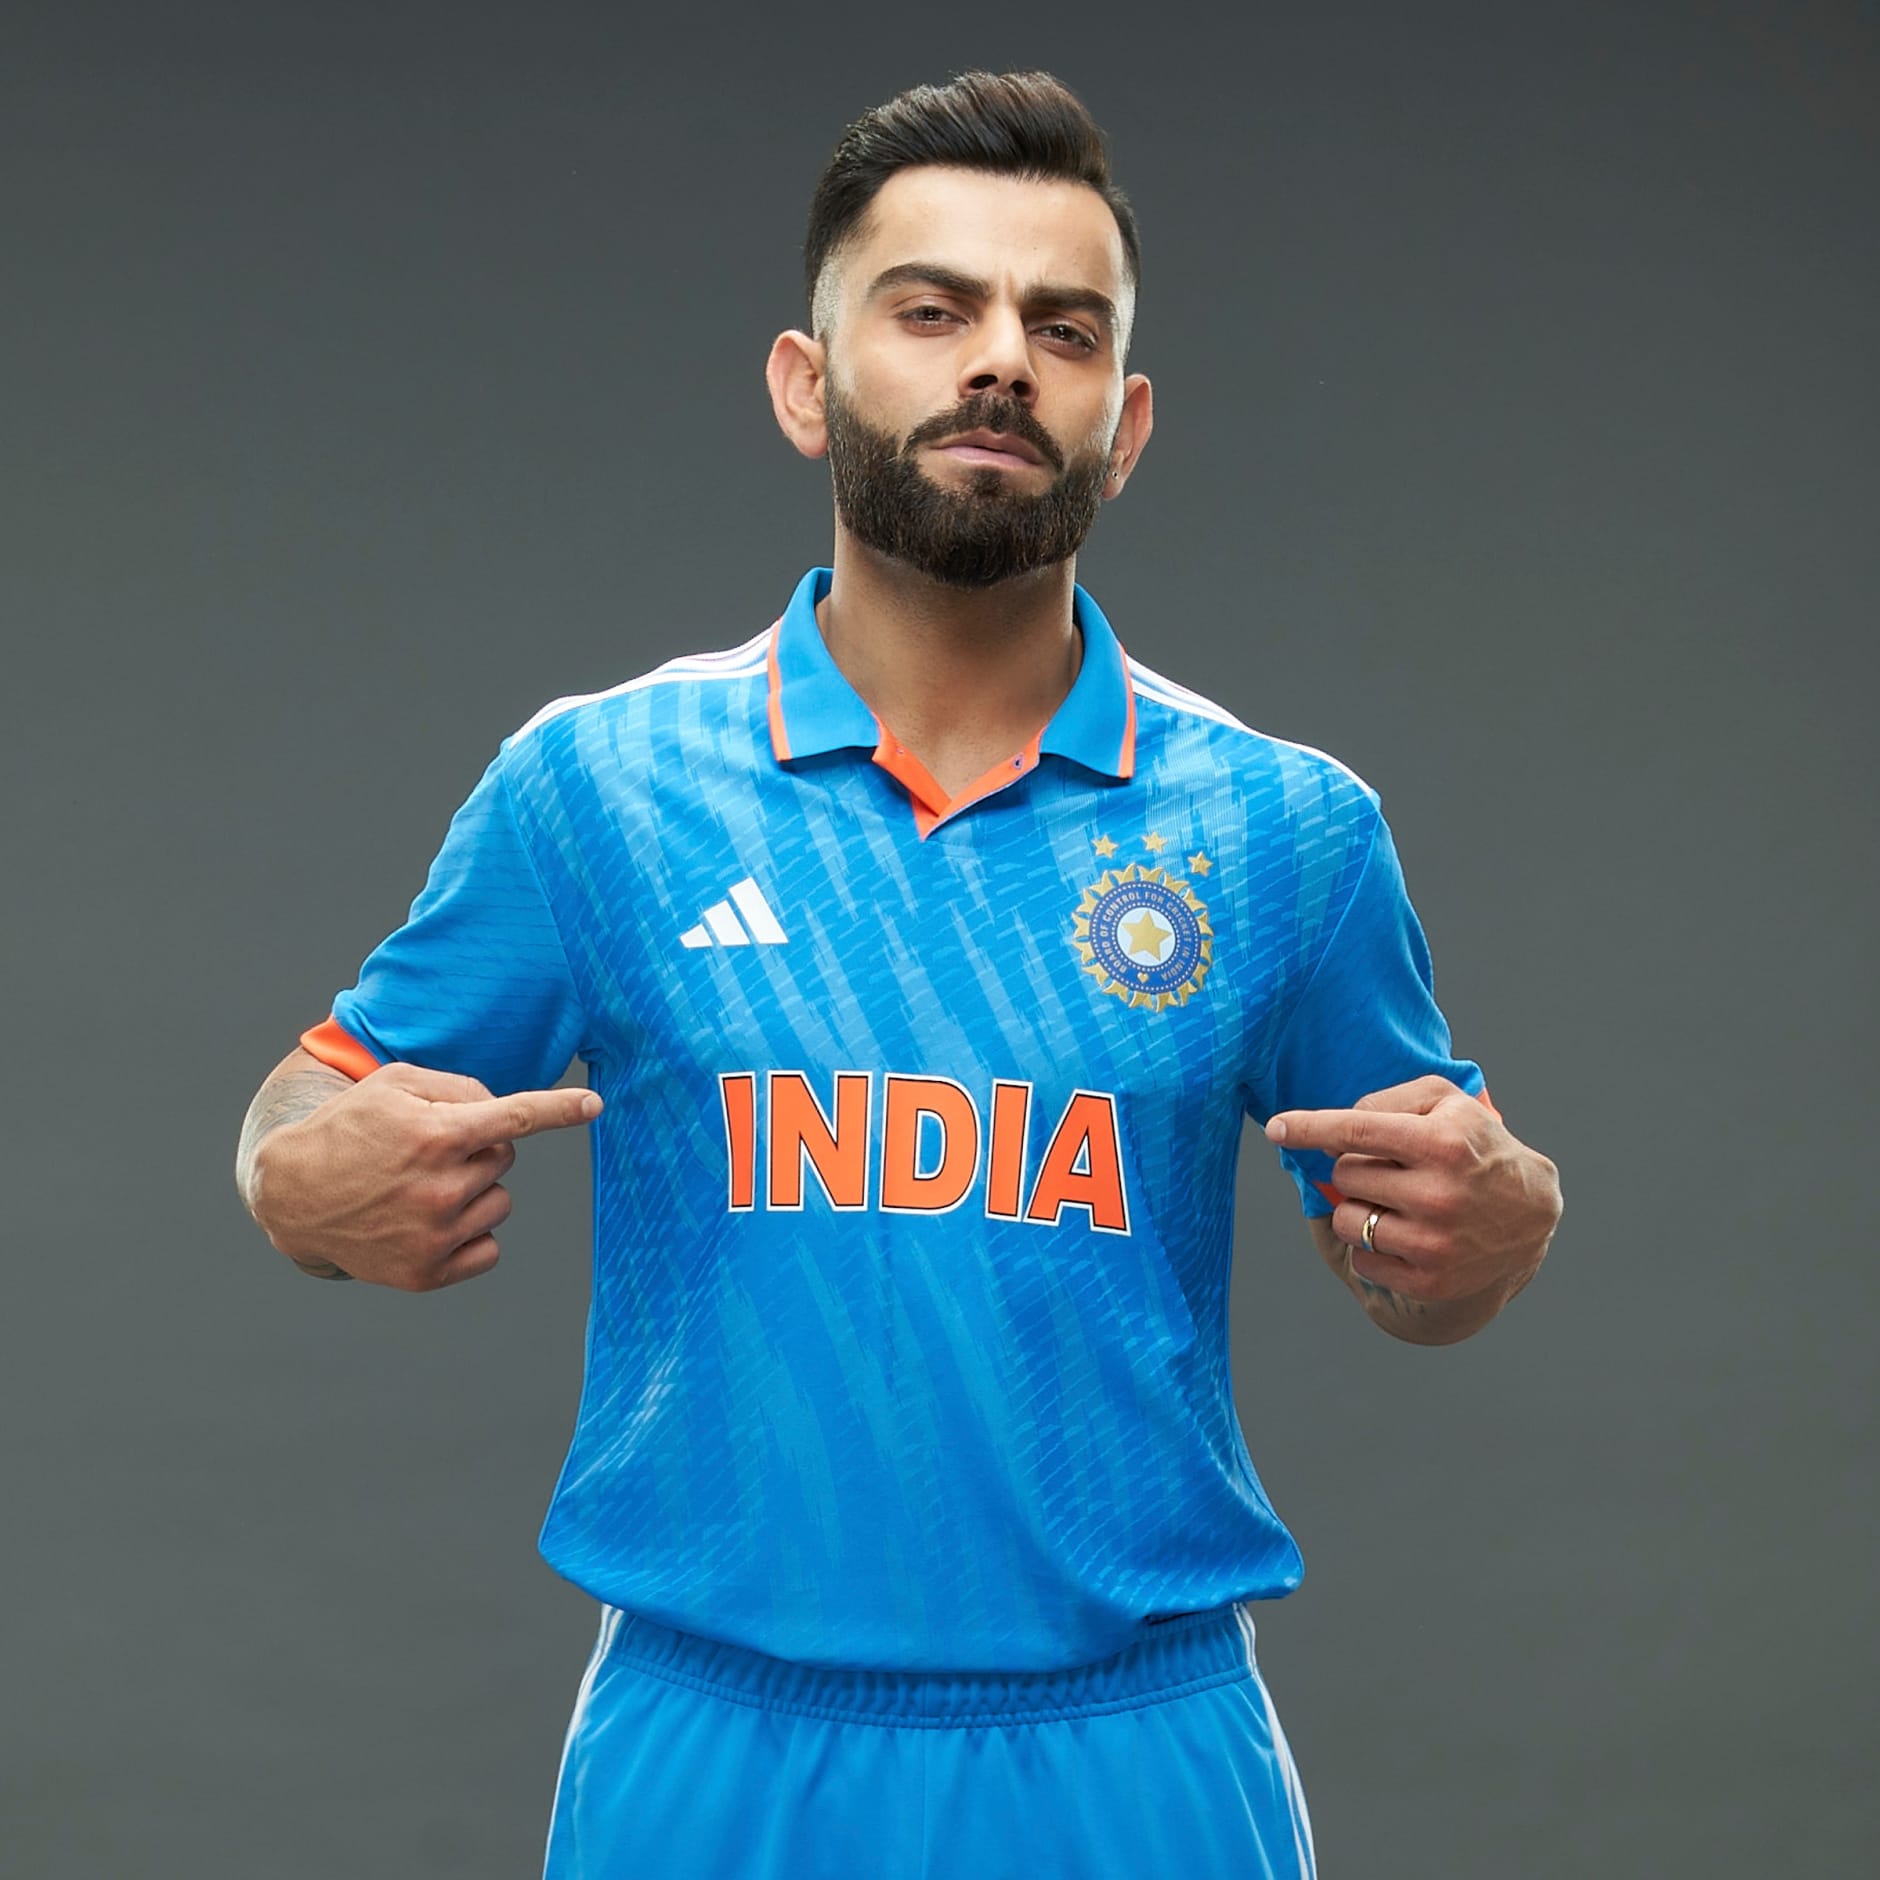 adidas INDIA CRICKET TRI COLOR JERSEY WITH 2 STARS MEN - Blue | adidas India